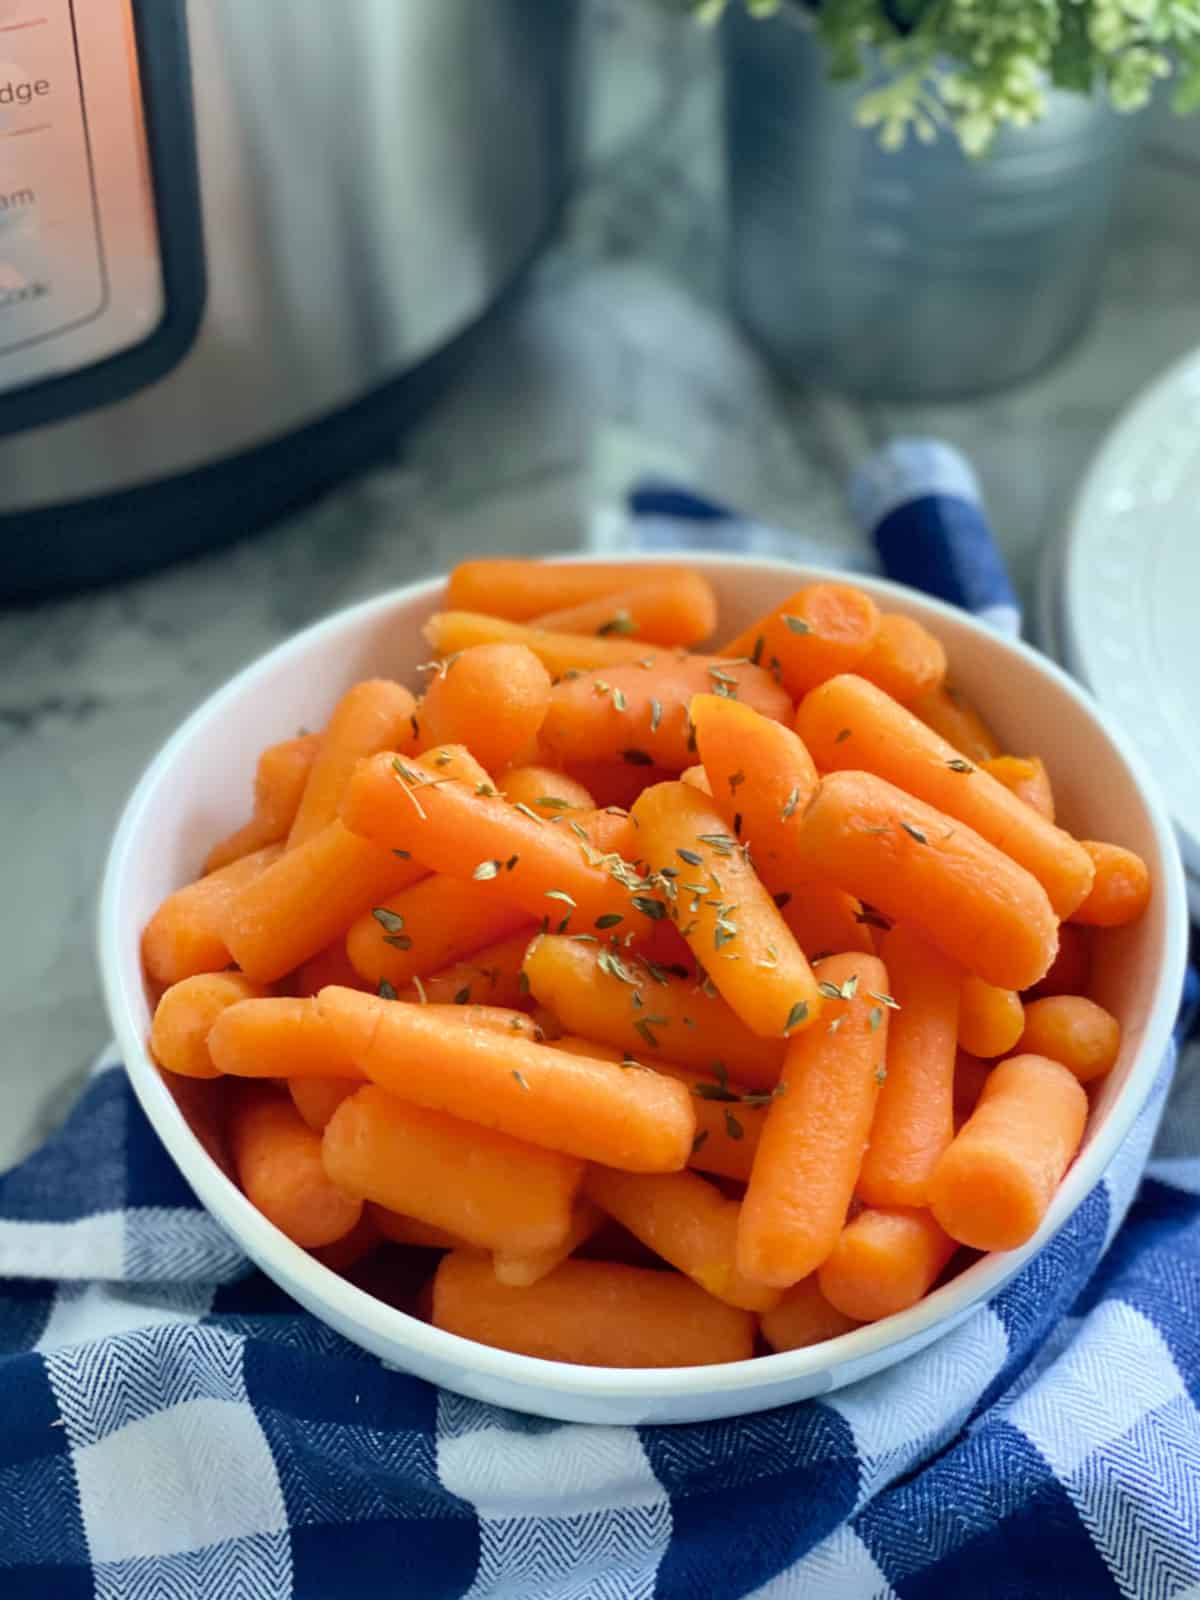 White bowl filled with baby carrots with a blue and white checkered cloth next to it.